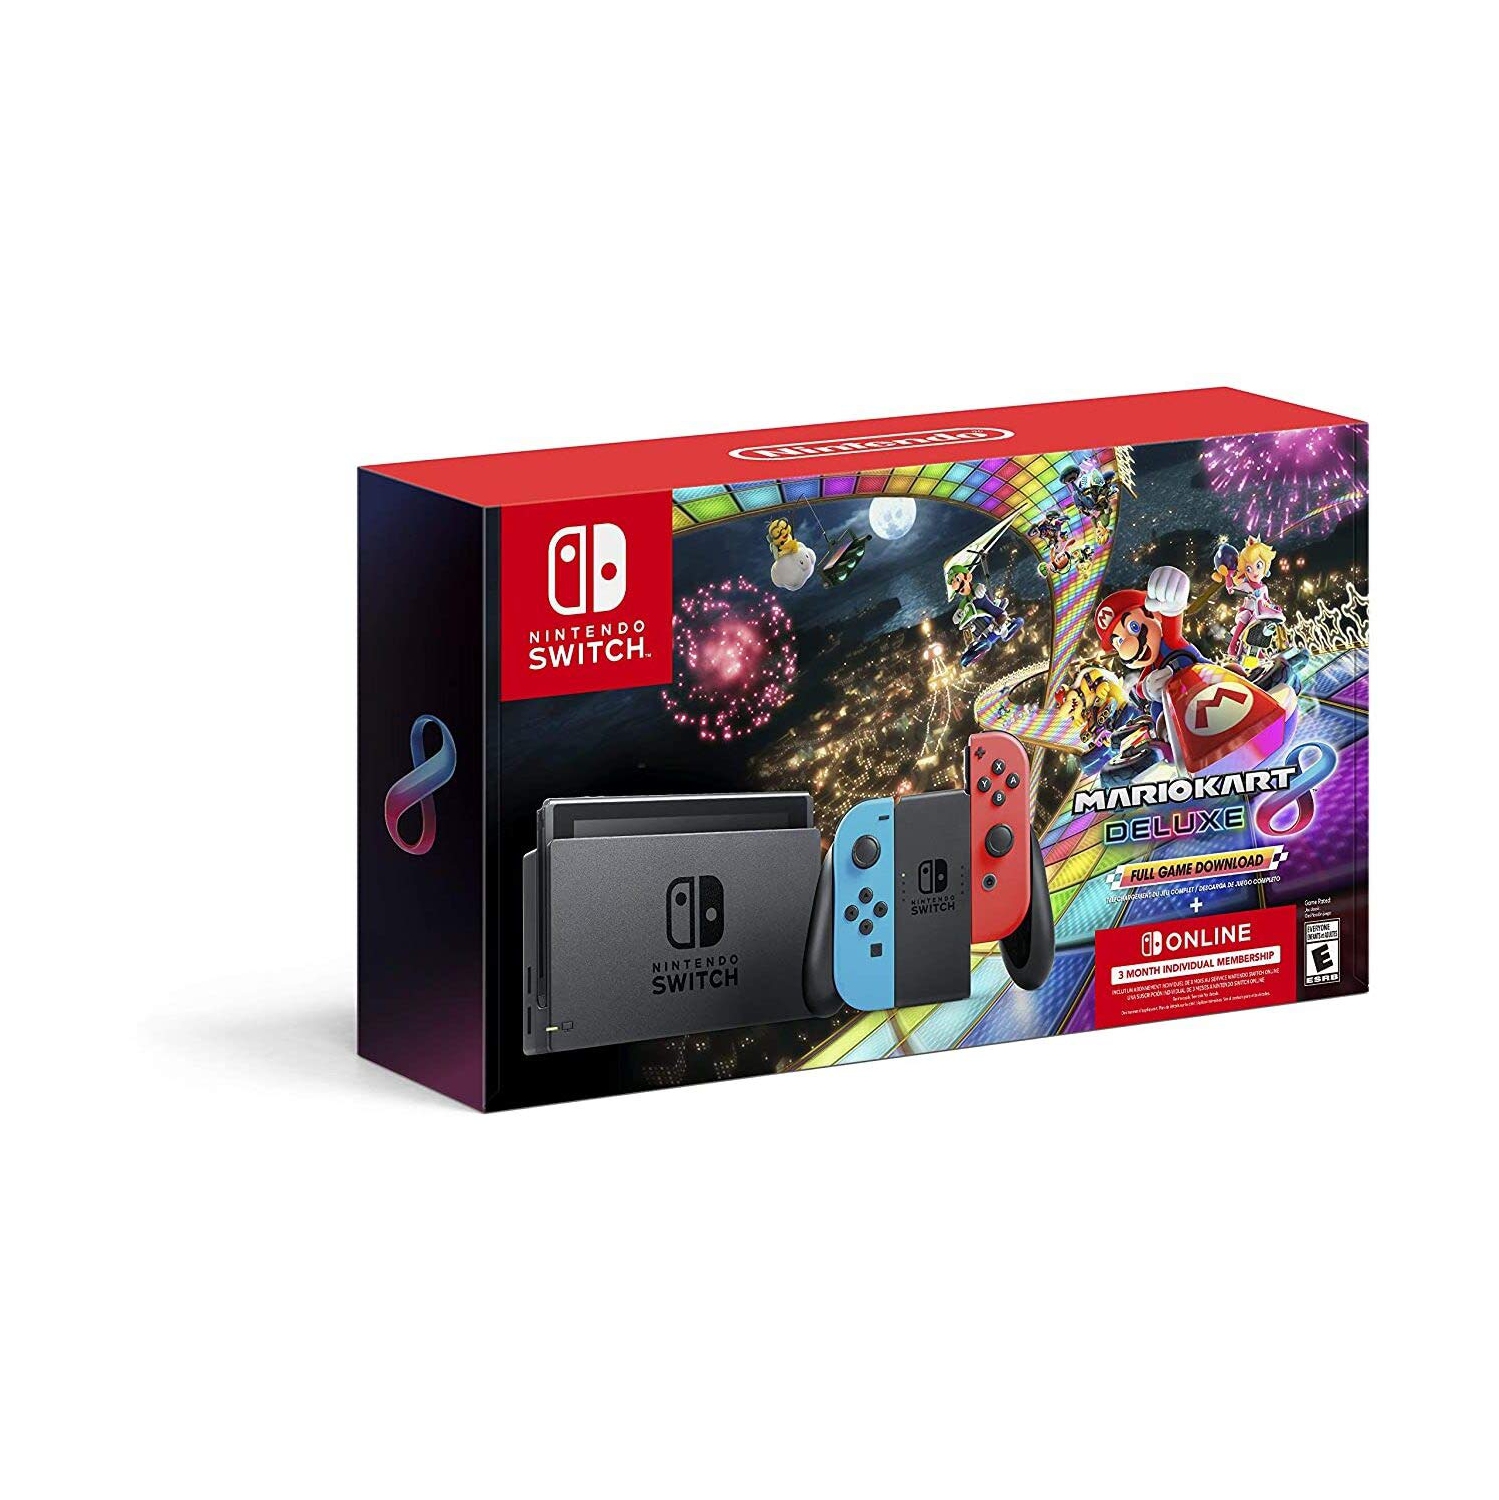 Nintendo Switch Console with Mario Kart 8 Deluxe (2nd Generation, Neon Blue and Red) - Brand New